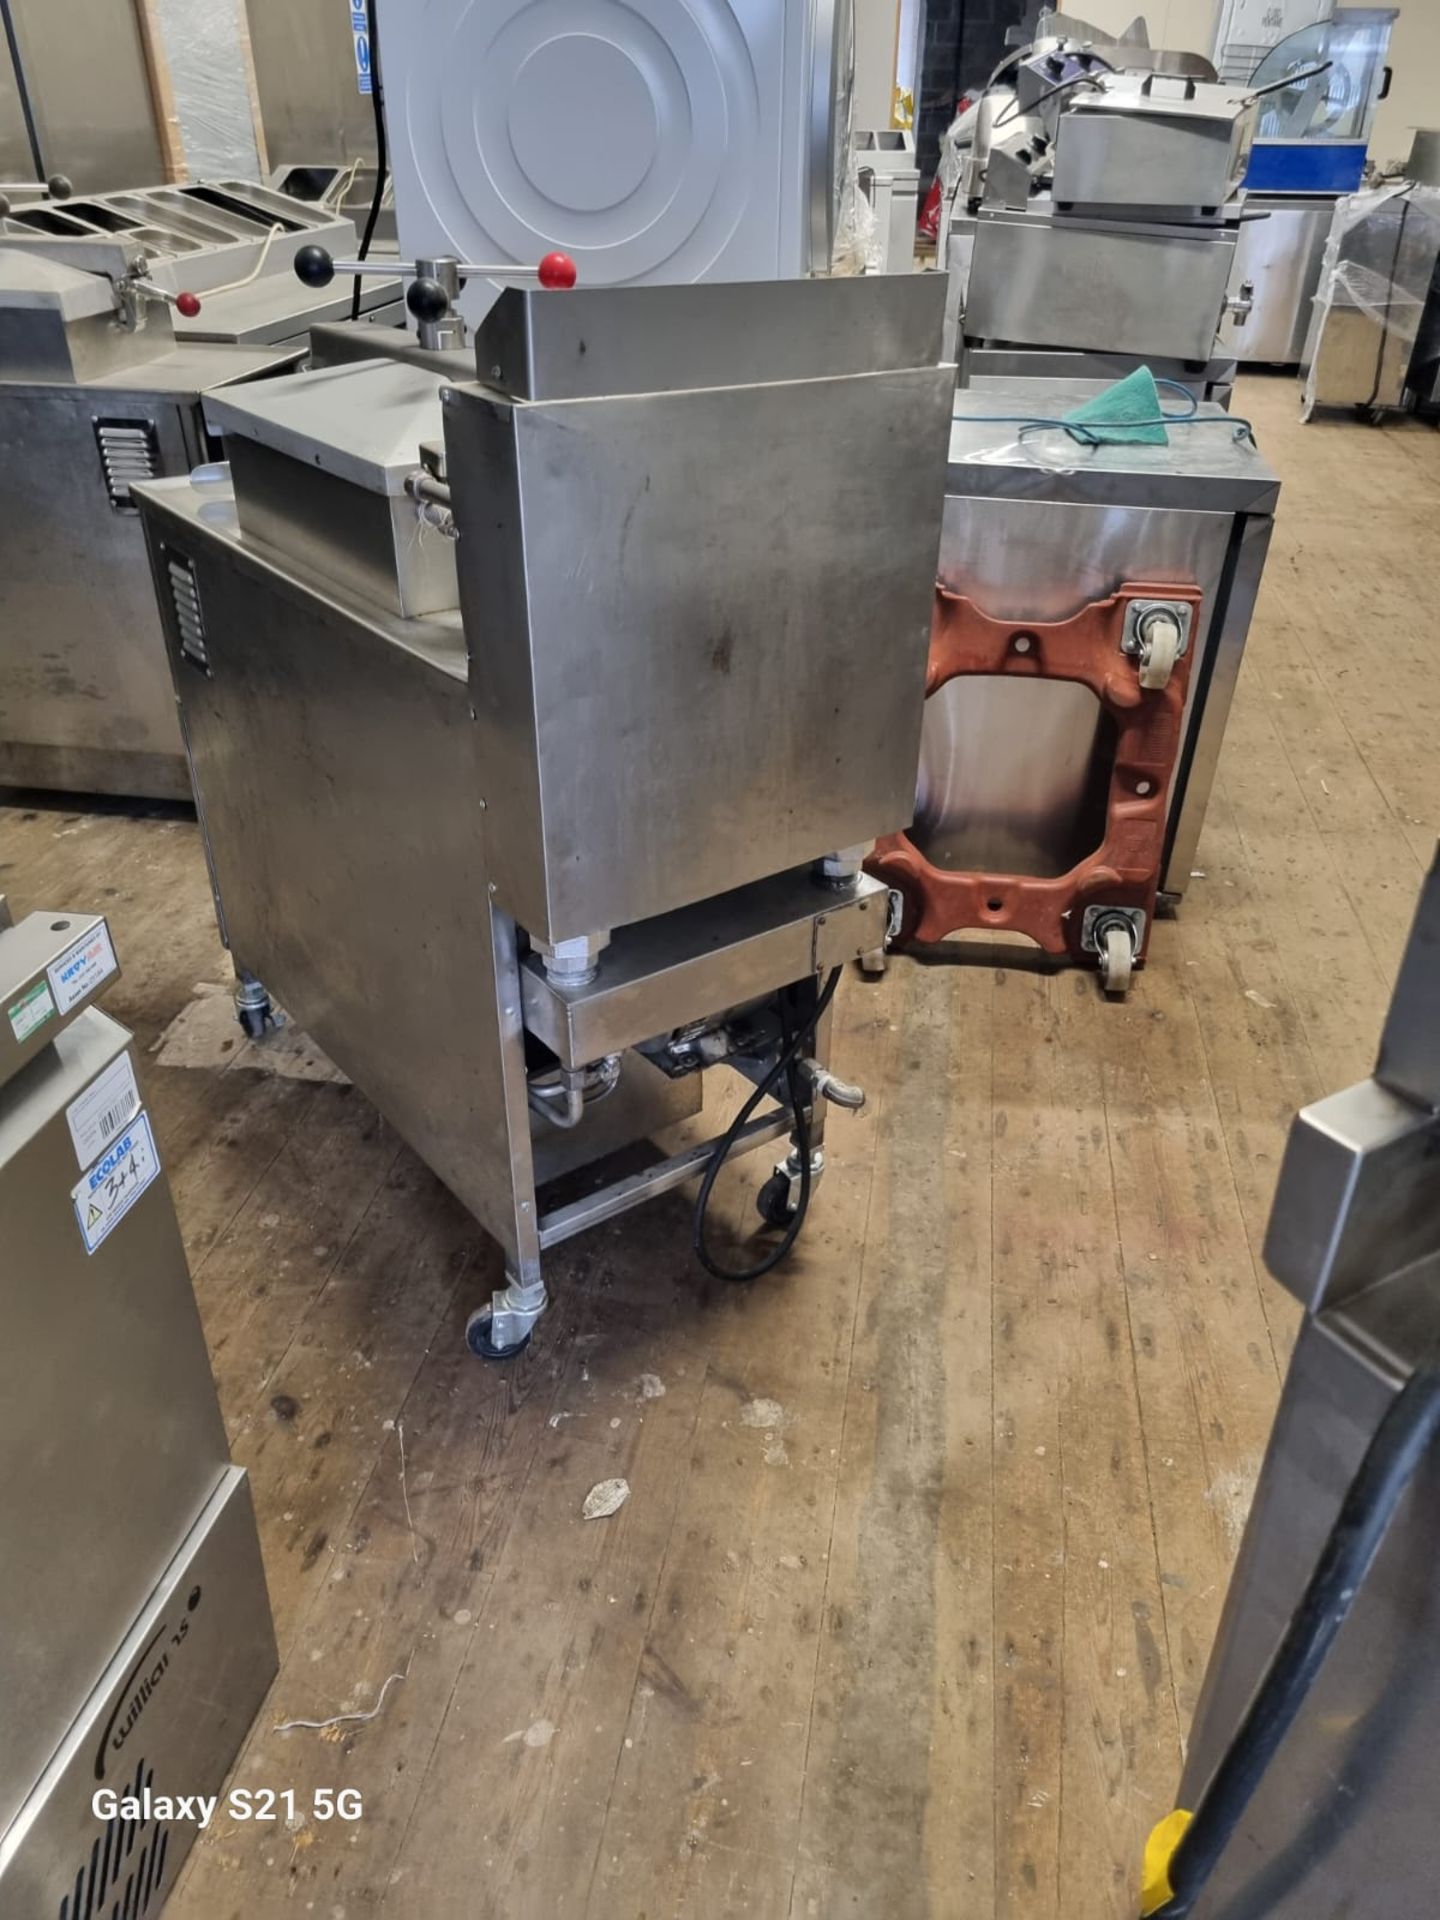 HENNY PENNY COMPUTEON 8000 GAS PRESSURE FRYER - FULLY SERVICED AND TESTED - ALL ORIGINAL PARTS  - Image 6 of 8